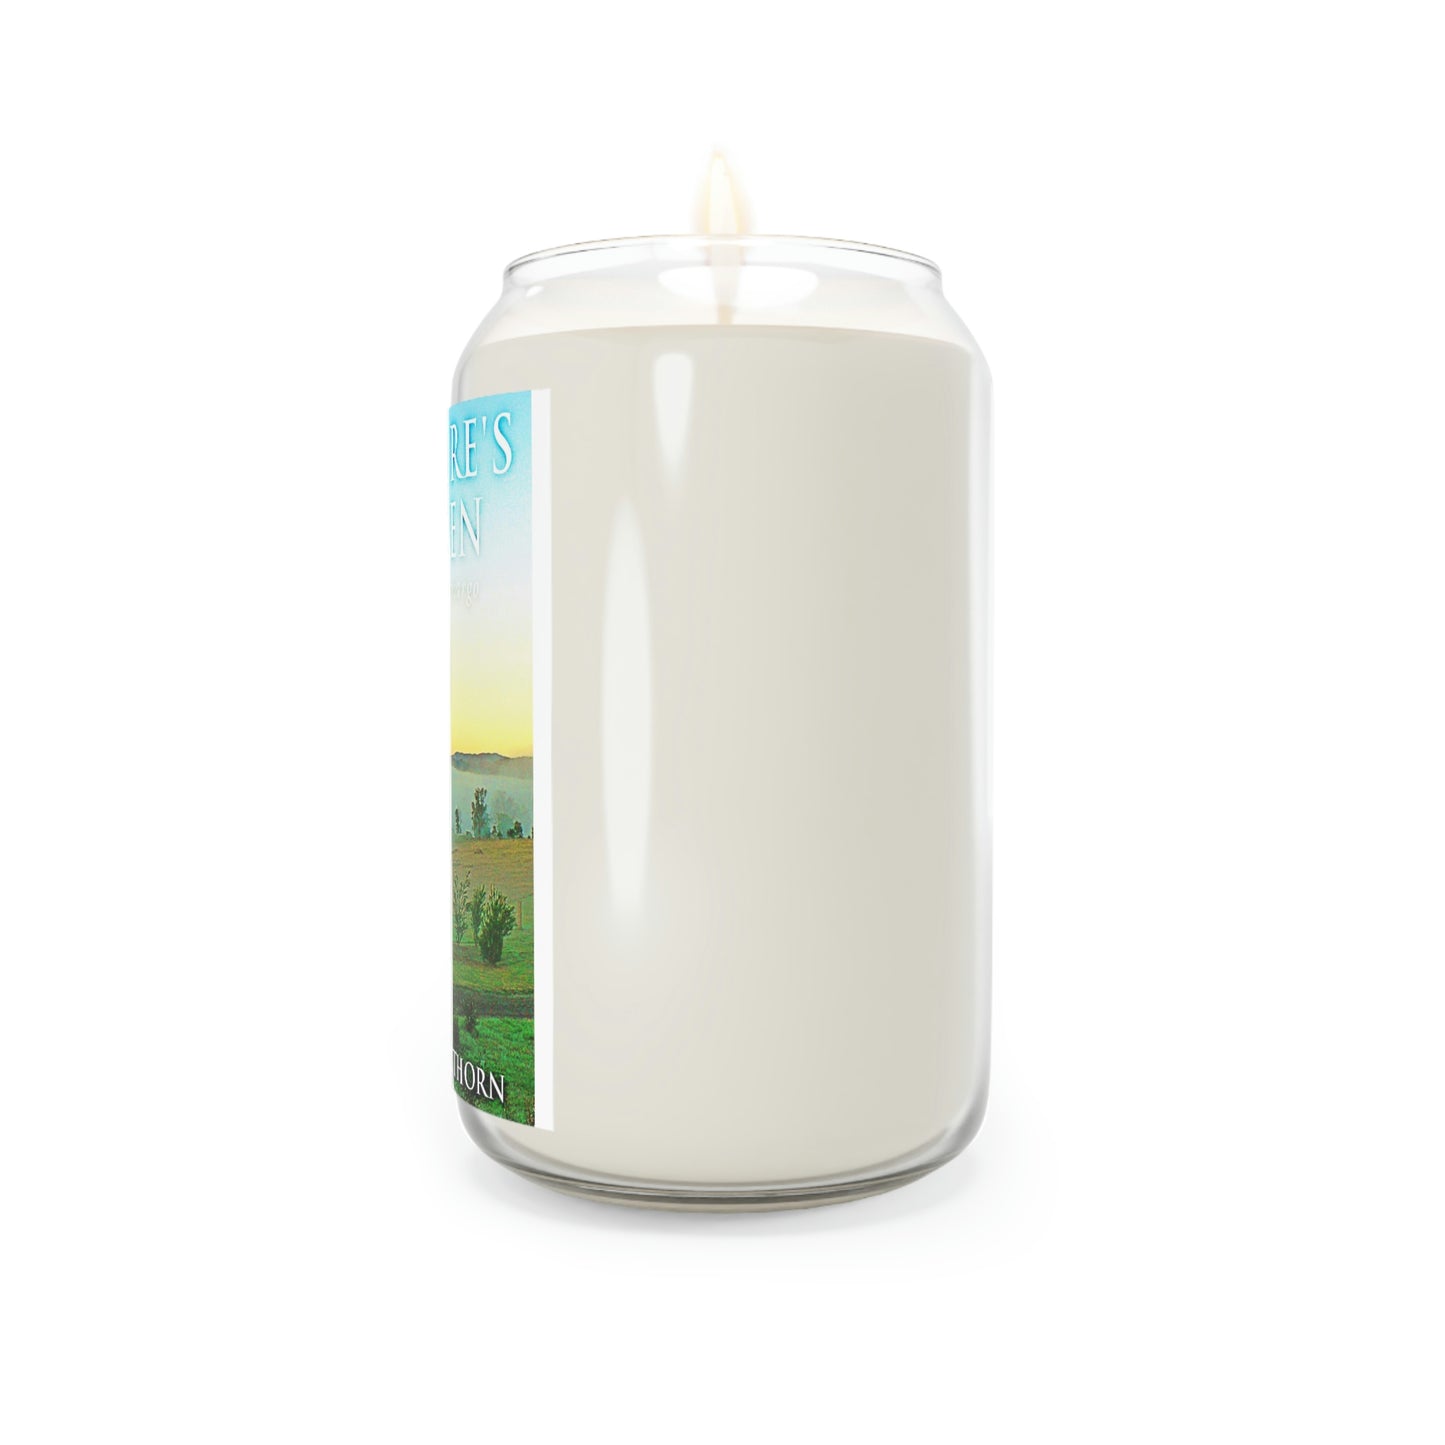 Voltaire's Garden - Scented Candle